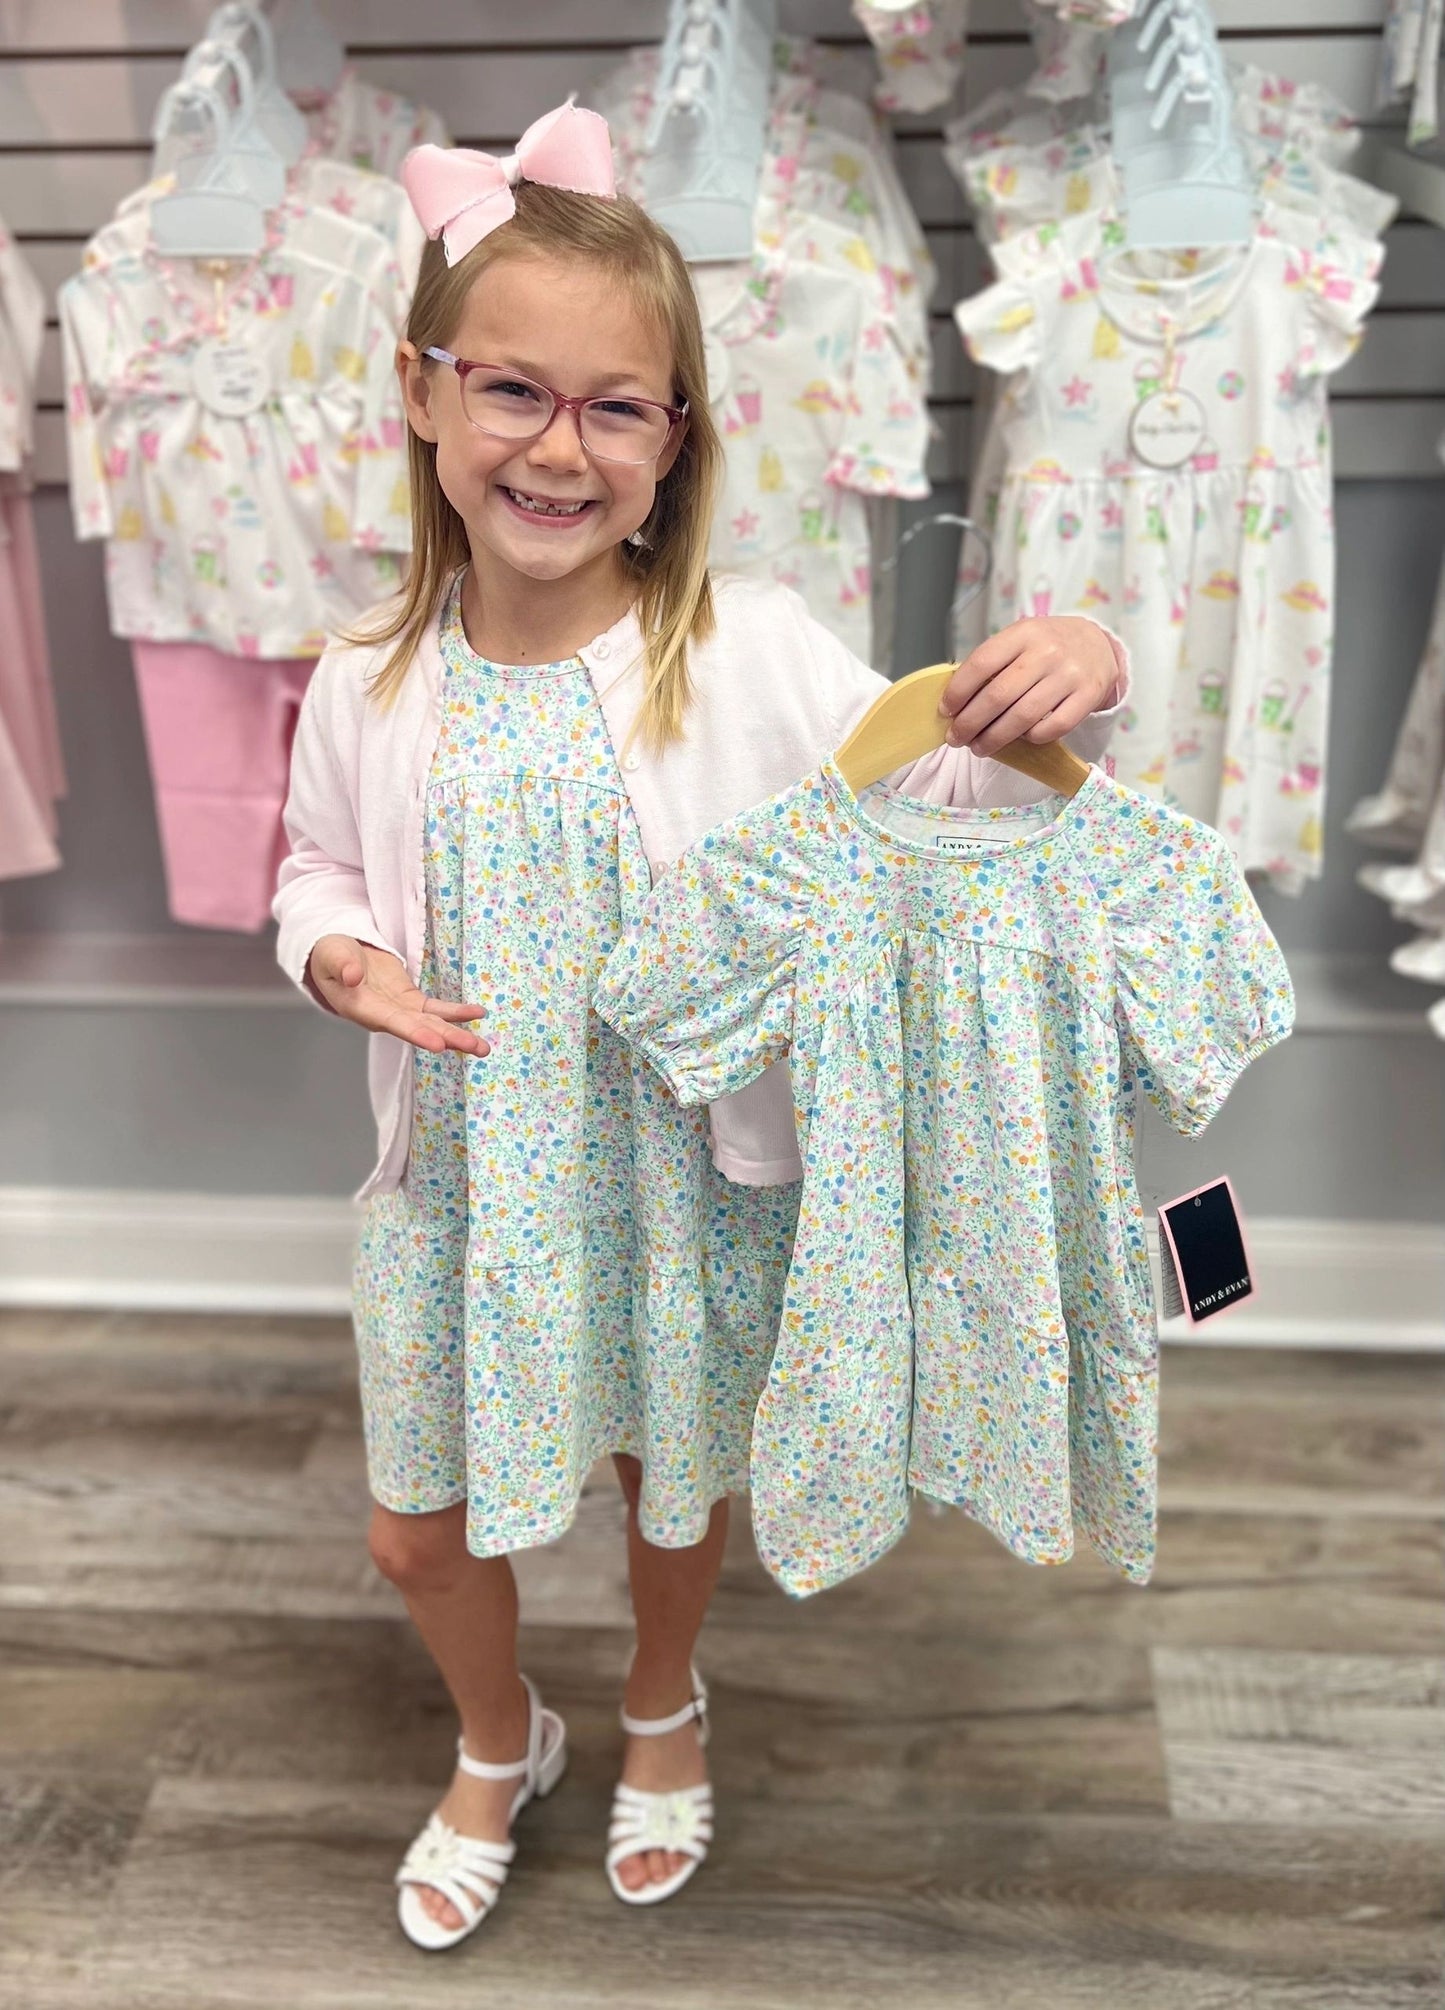 Andy & Evan Floral Puff Sleeve Dress: 2T,4T,6